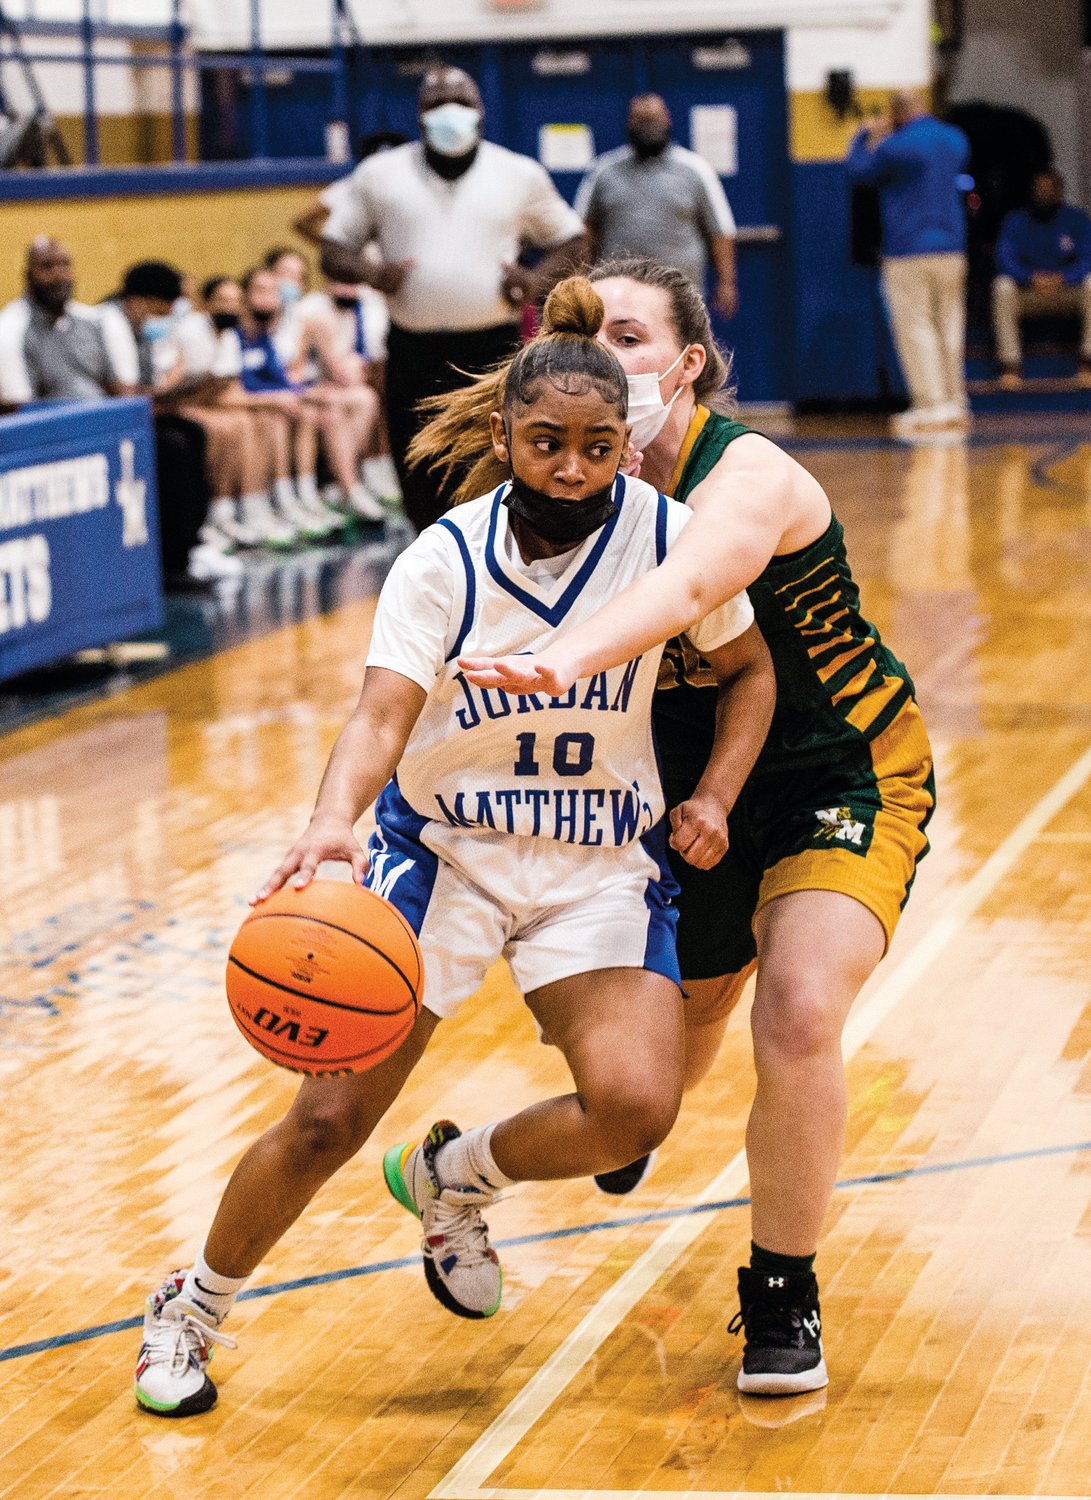 Jordan-Matthews senior Eillia Wright (10) fights through contact on her way to the hoop in the Jets' 50-21 win over the North Moore Mustangs last Wednesday. Wright has been described as the team's 'engine' by head coach Lamont Piggie. She had 19 points against the Mustangs.